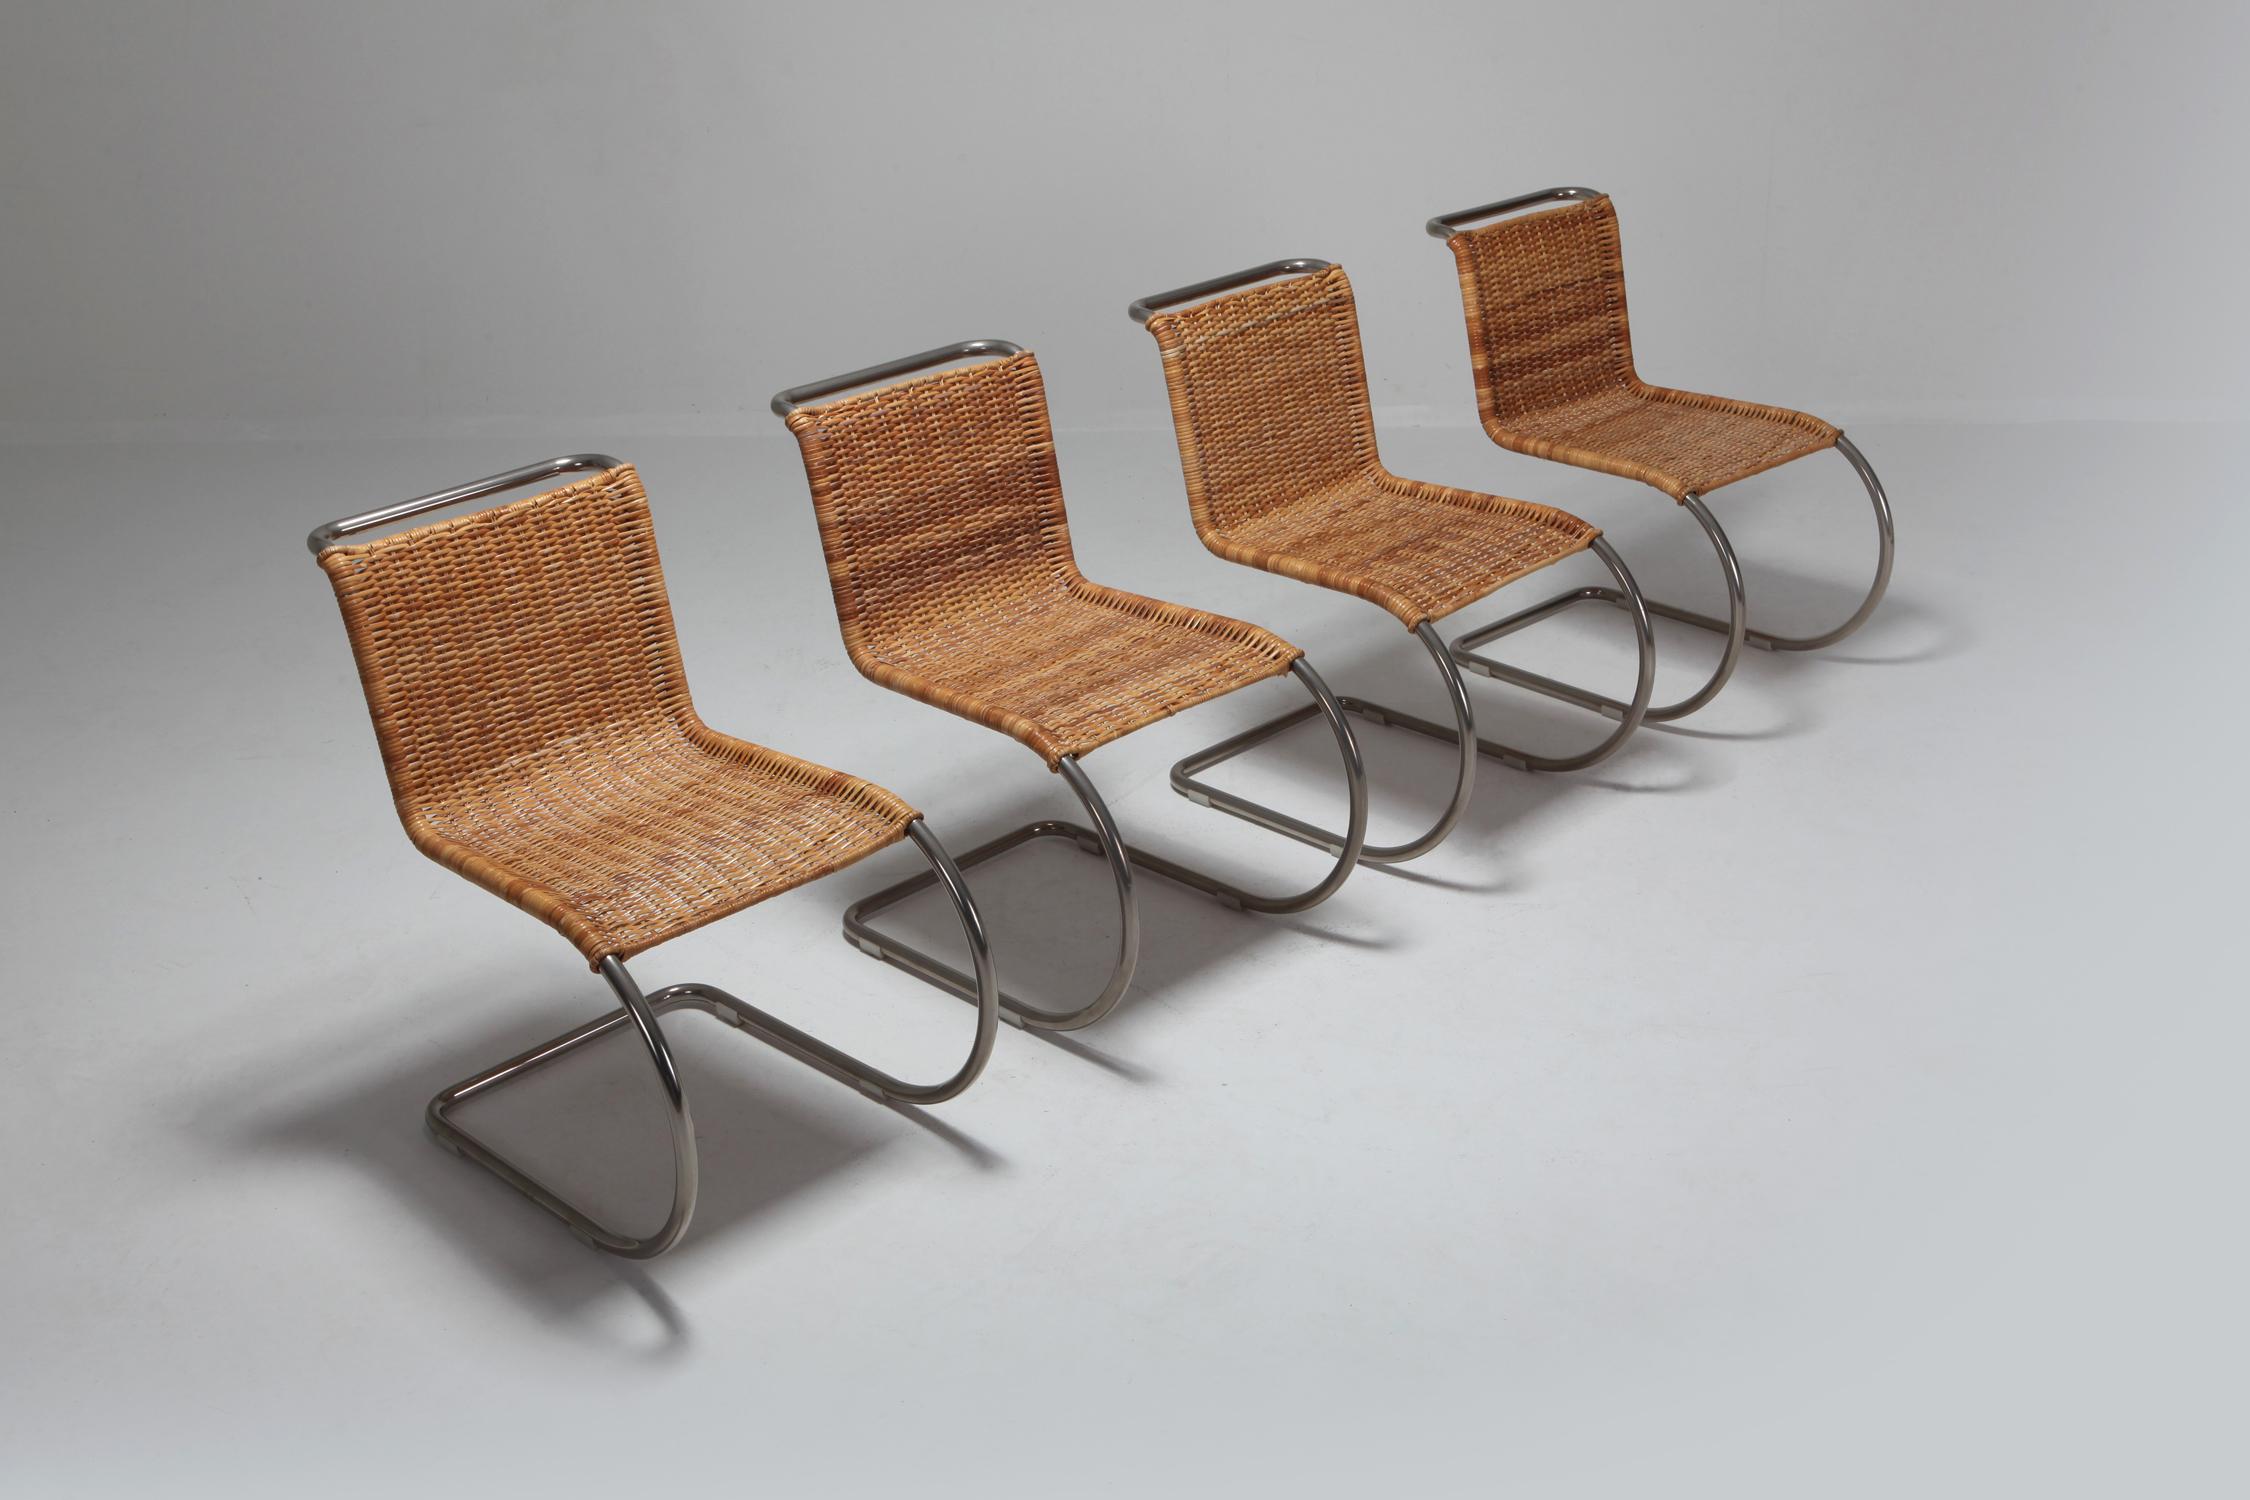 Mies van der Rohe Weissenhof chair B42 by Tecta, new cane seating and nickeled steel frame.
designed in 1927, produced in 1982.
